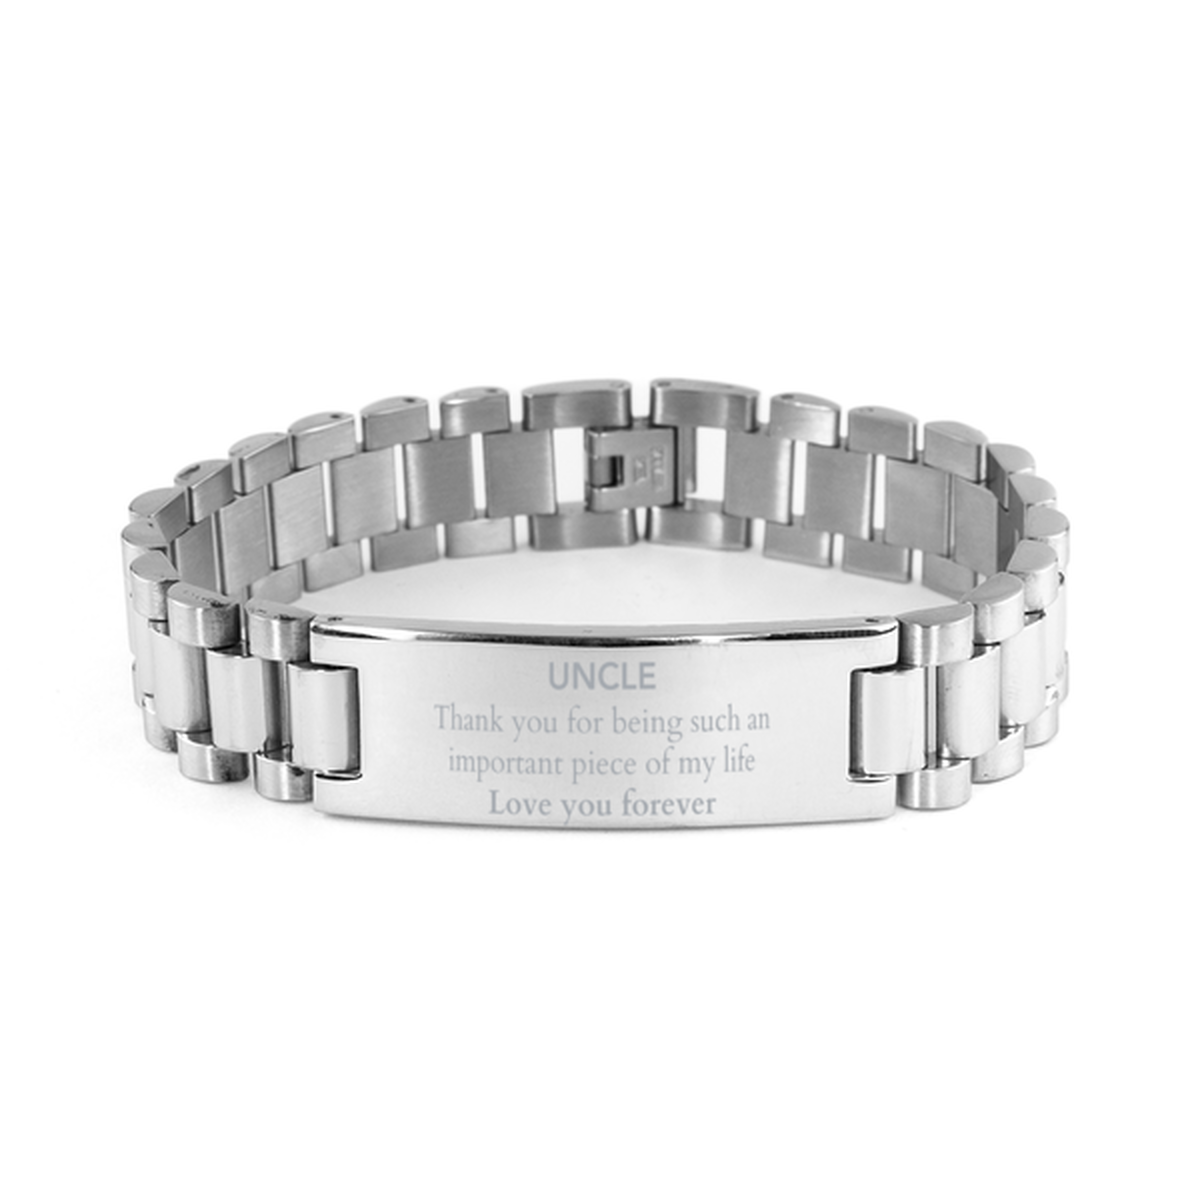 Appropriate Uncle Ladder Stainless Steel Bracelet Epic Birthday Gifts for Uncle Thank you for being such an important piece of my life Uncle Christmas Mothers Fathers Day